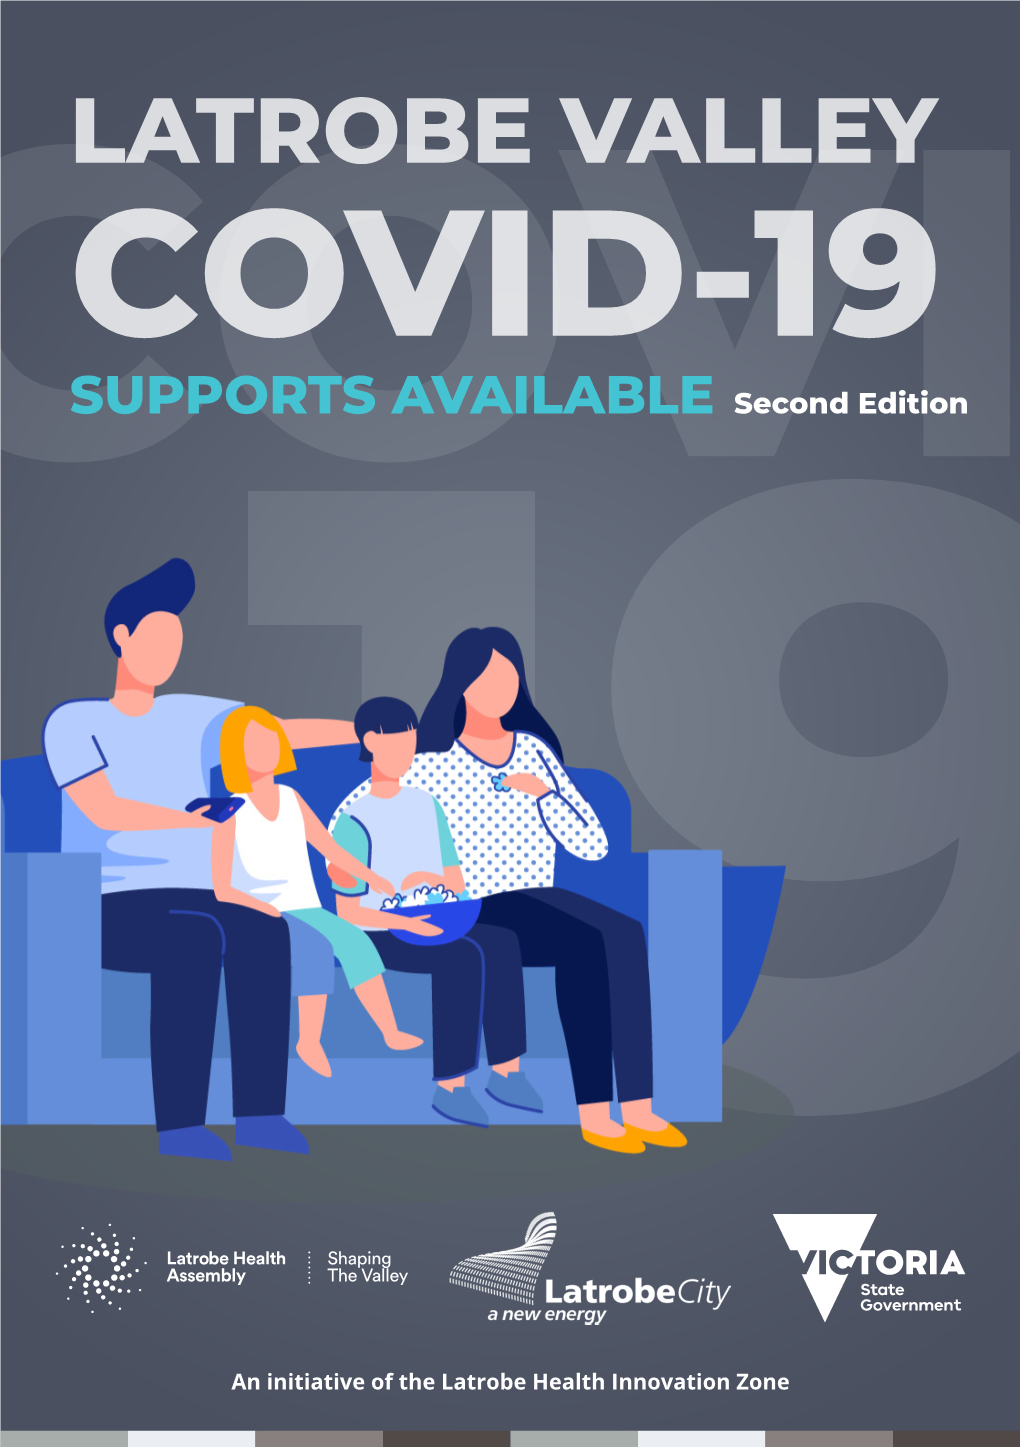 LATROBE VALLEY COVID-19 COVIDSUPPORTS AVAILABLE Second Edition 19